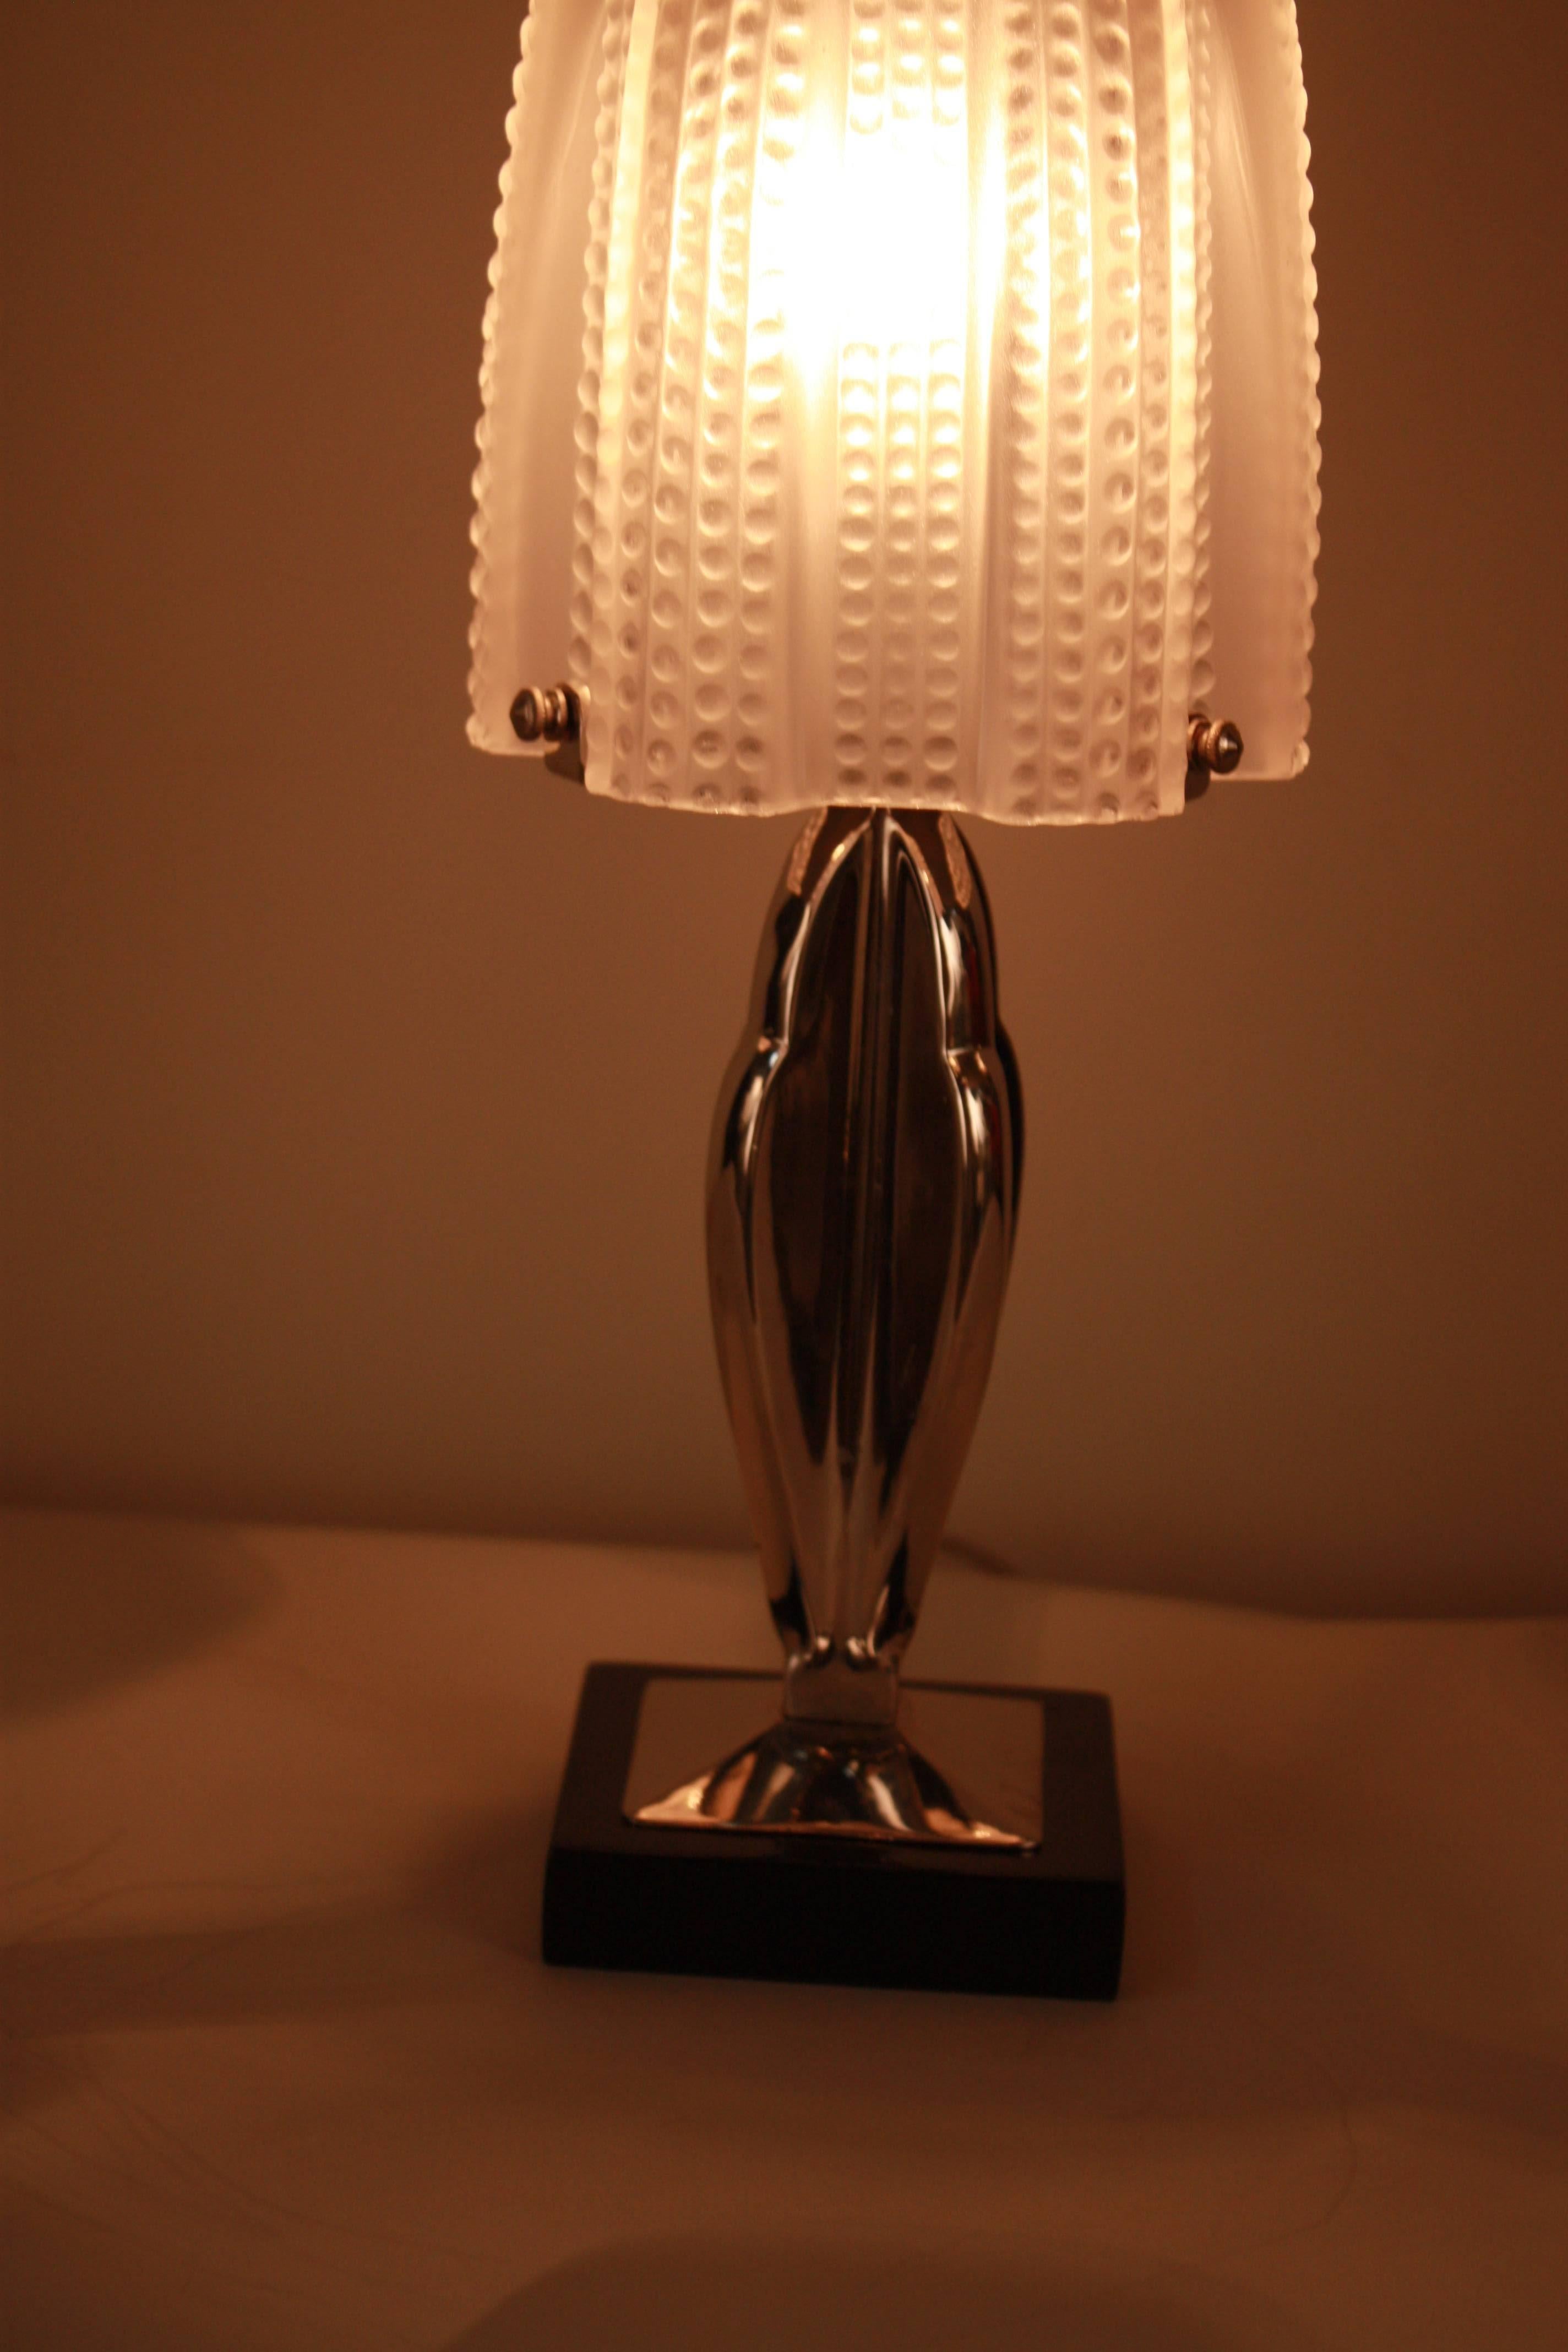 Frost glass with high light polish, polished nickel base over marble table lamp.